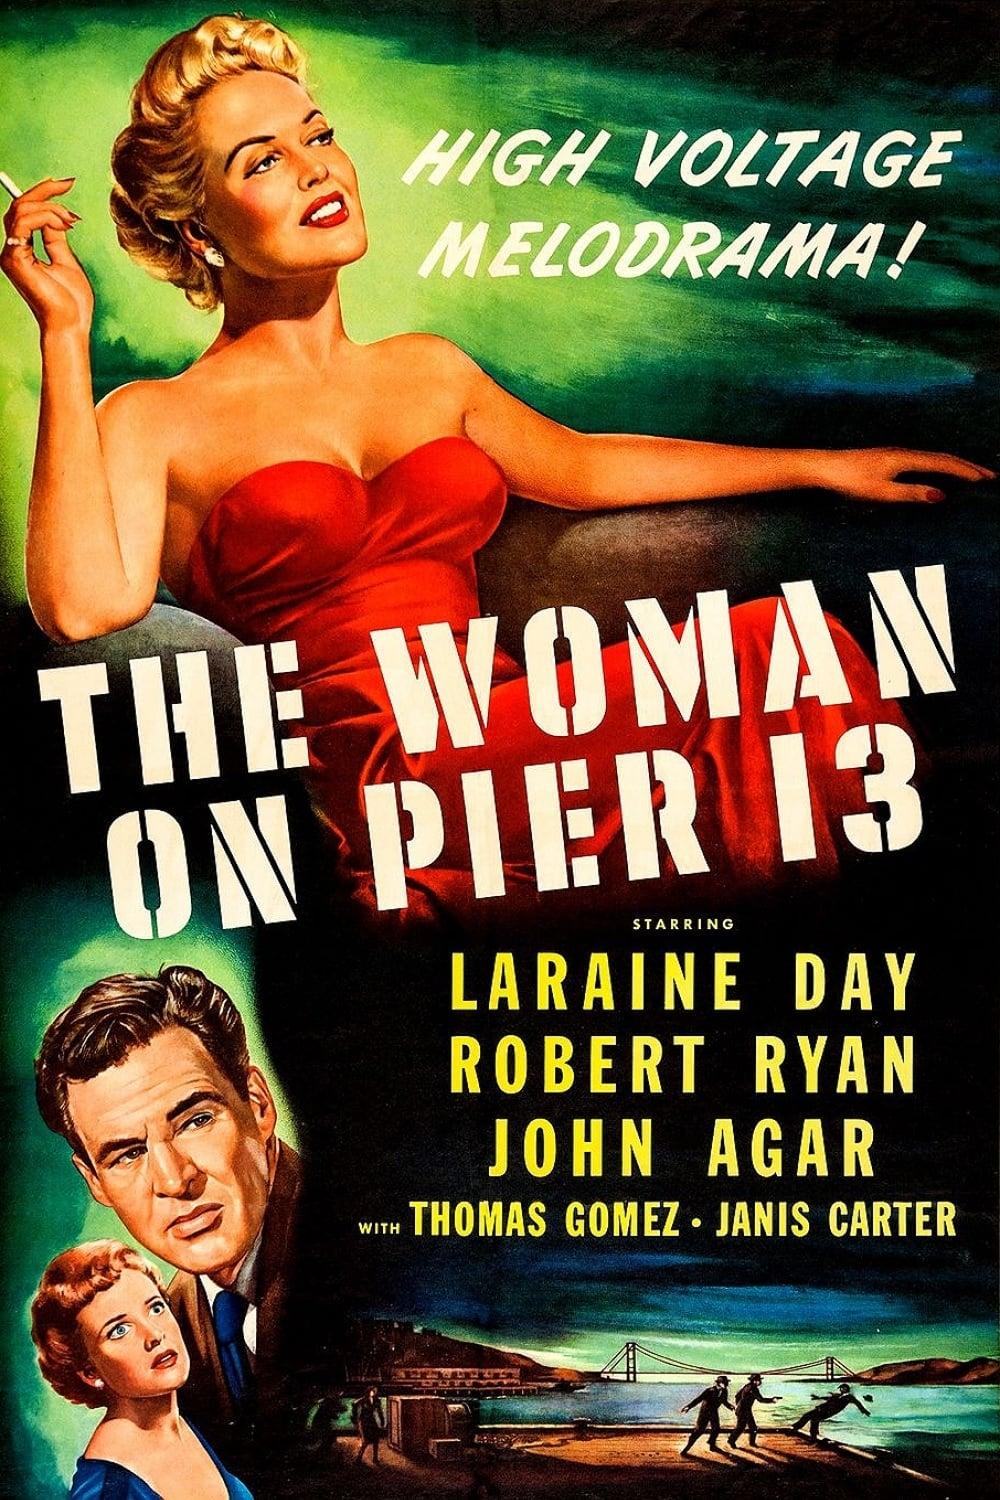 The Woman on Pier 13 poster